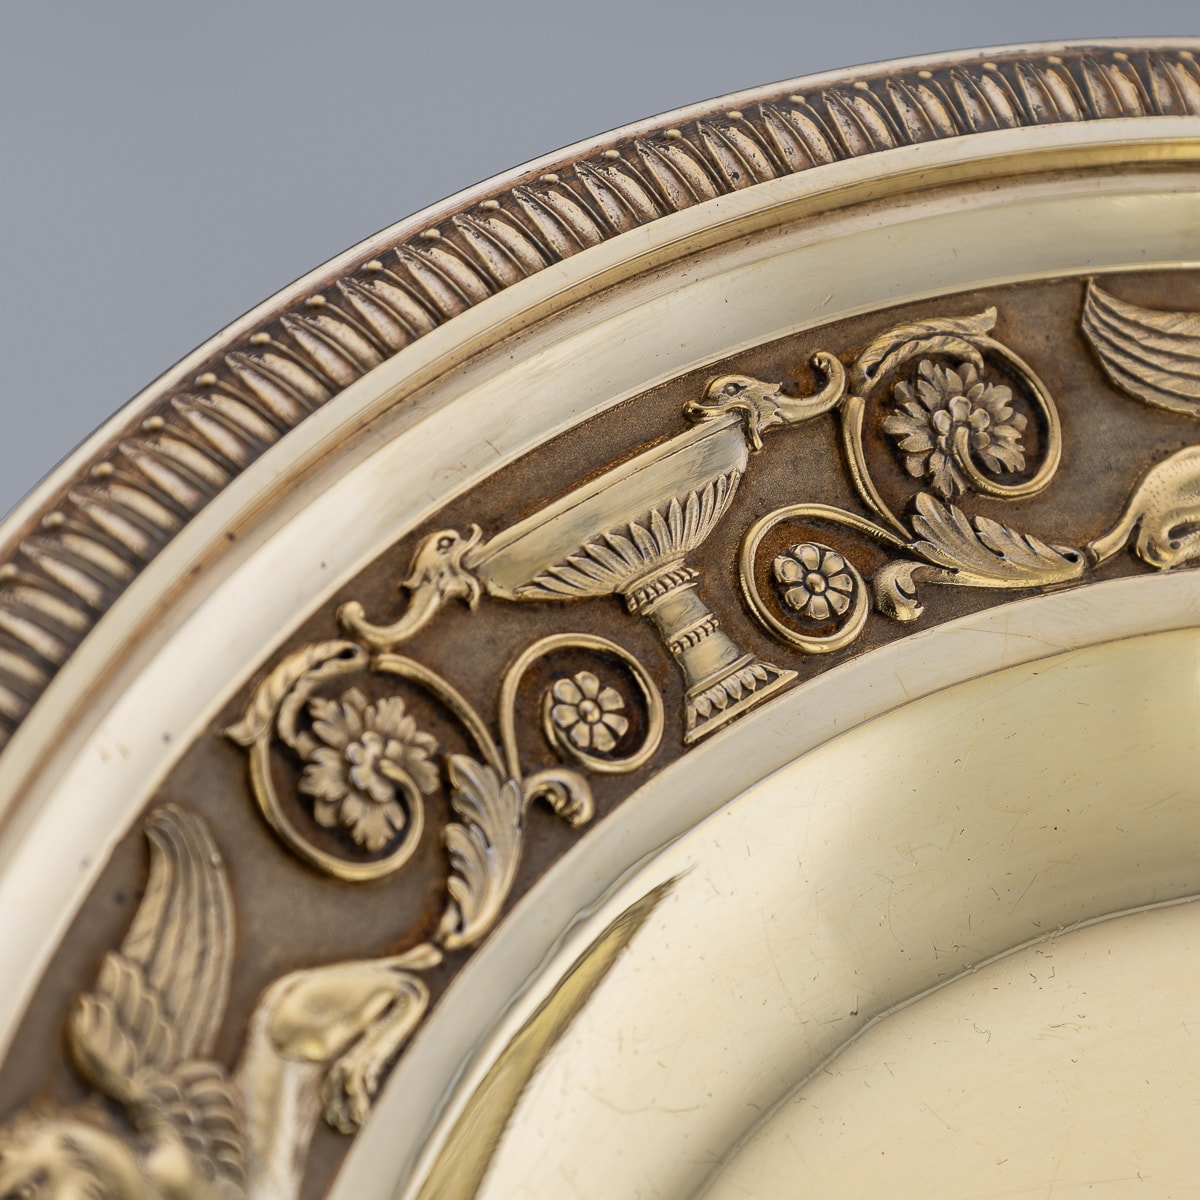 ODIOT: A FINE PAIR OF 19TH CENTURY FRENCH SILVER GILT DISHES, MAISON ODIOT, C. 1890 - Image 14 of 14